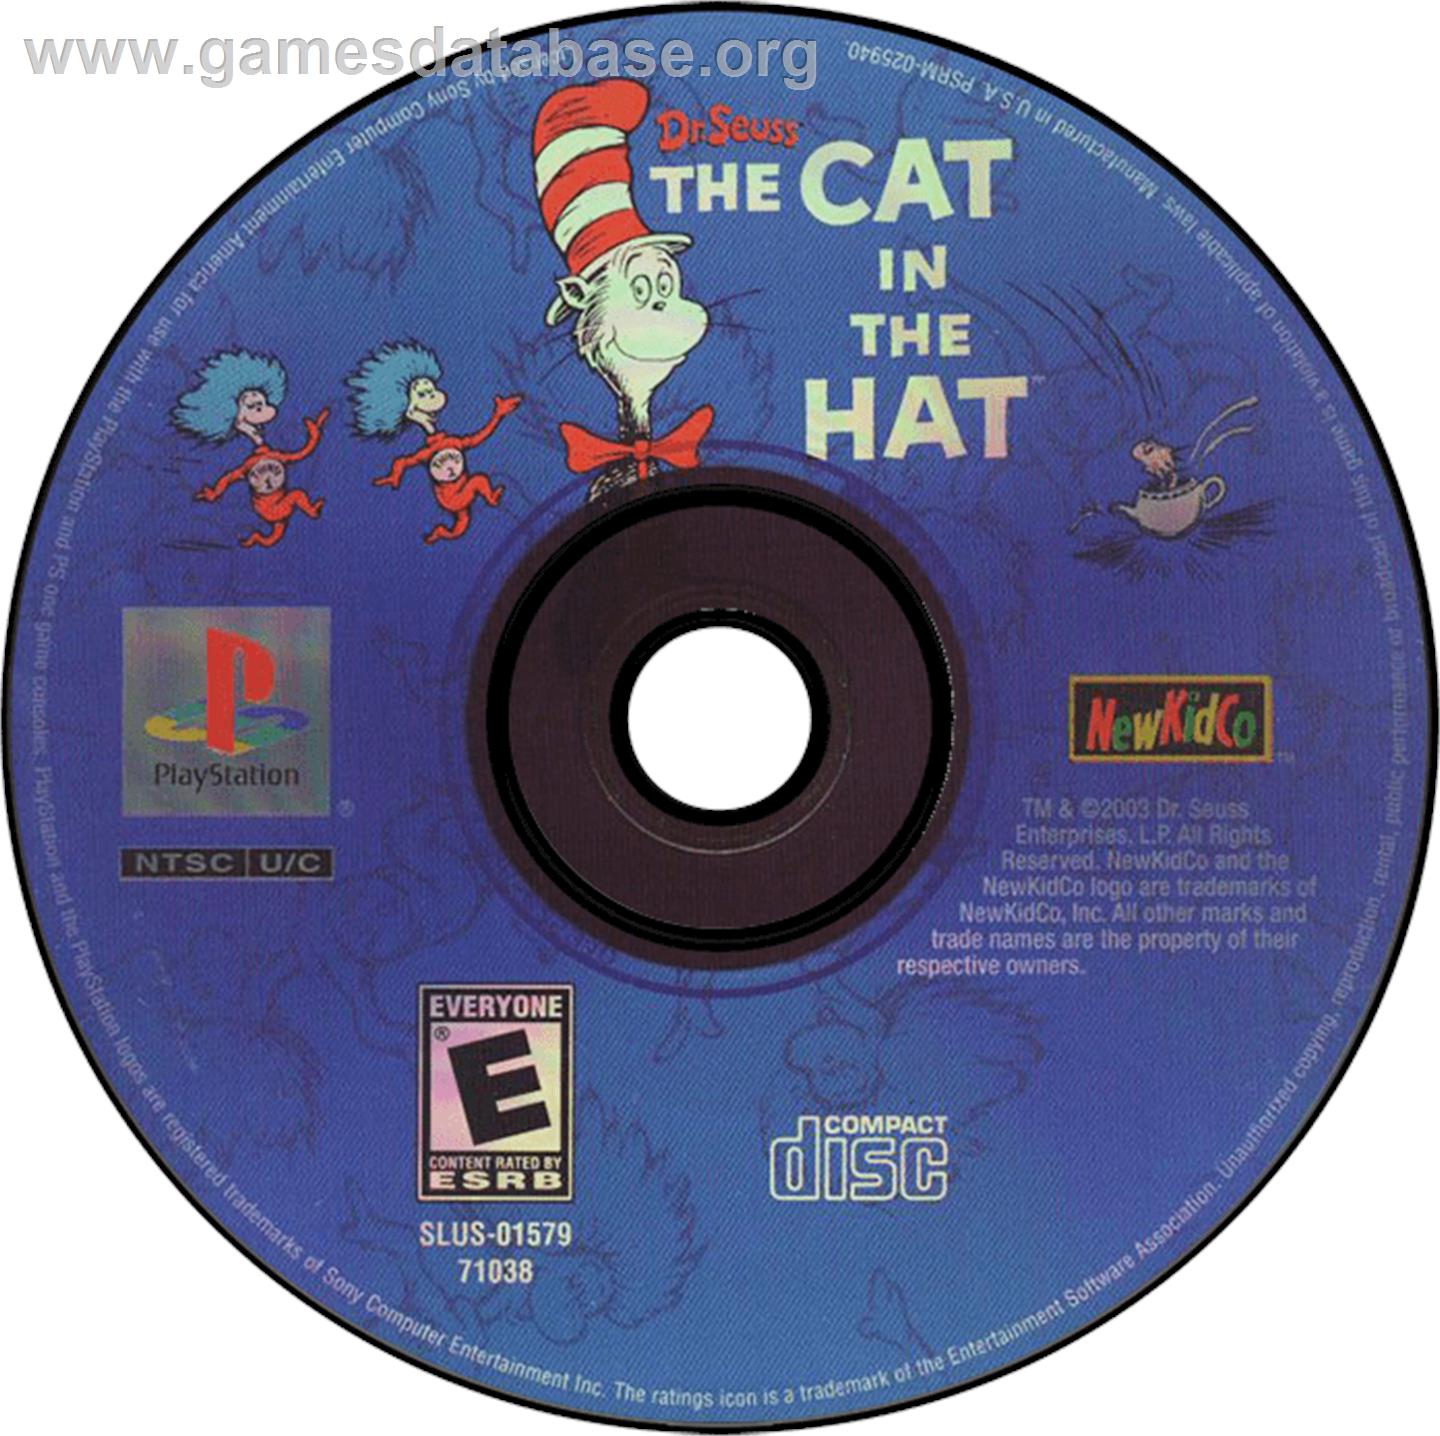 The Cat in the Hat - Sony Playstation - Artwork - Disc